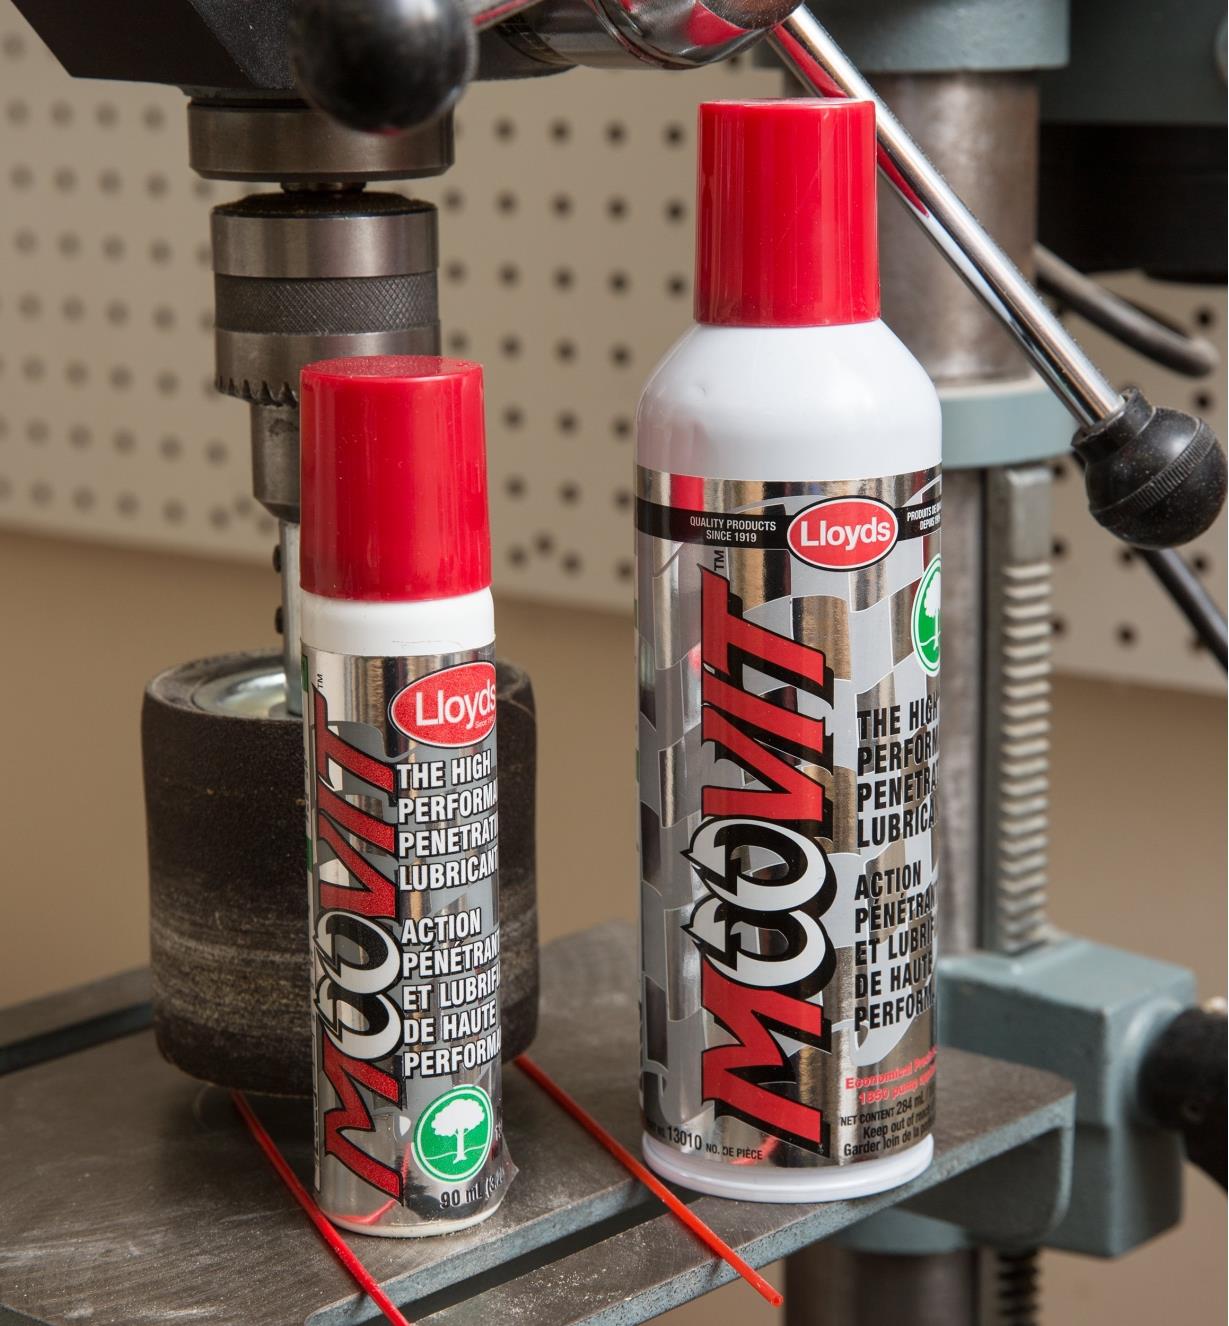 Twio cans of Moovit Penetrating Lubricant sitting on a drill press